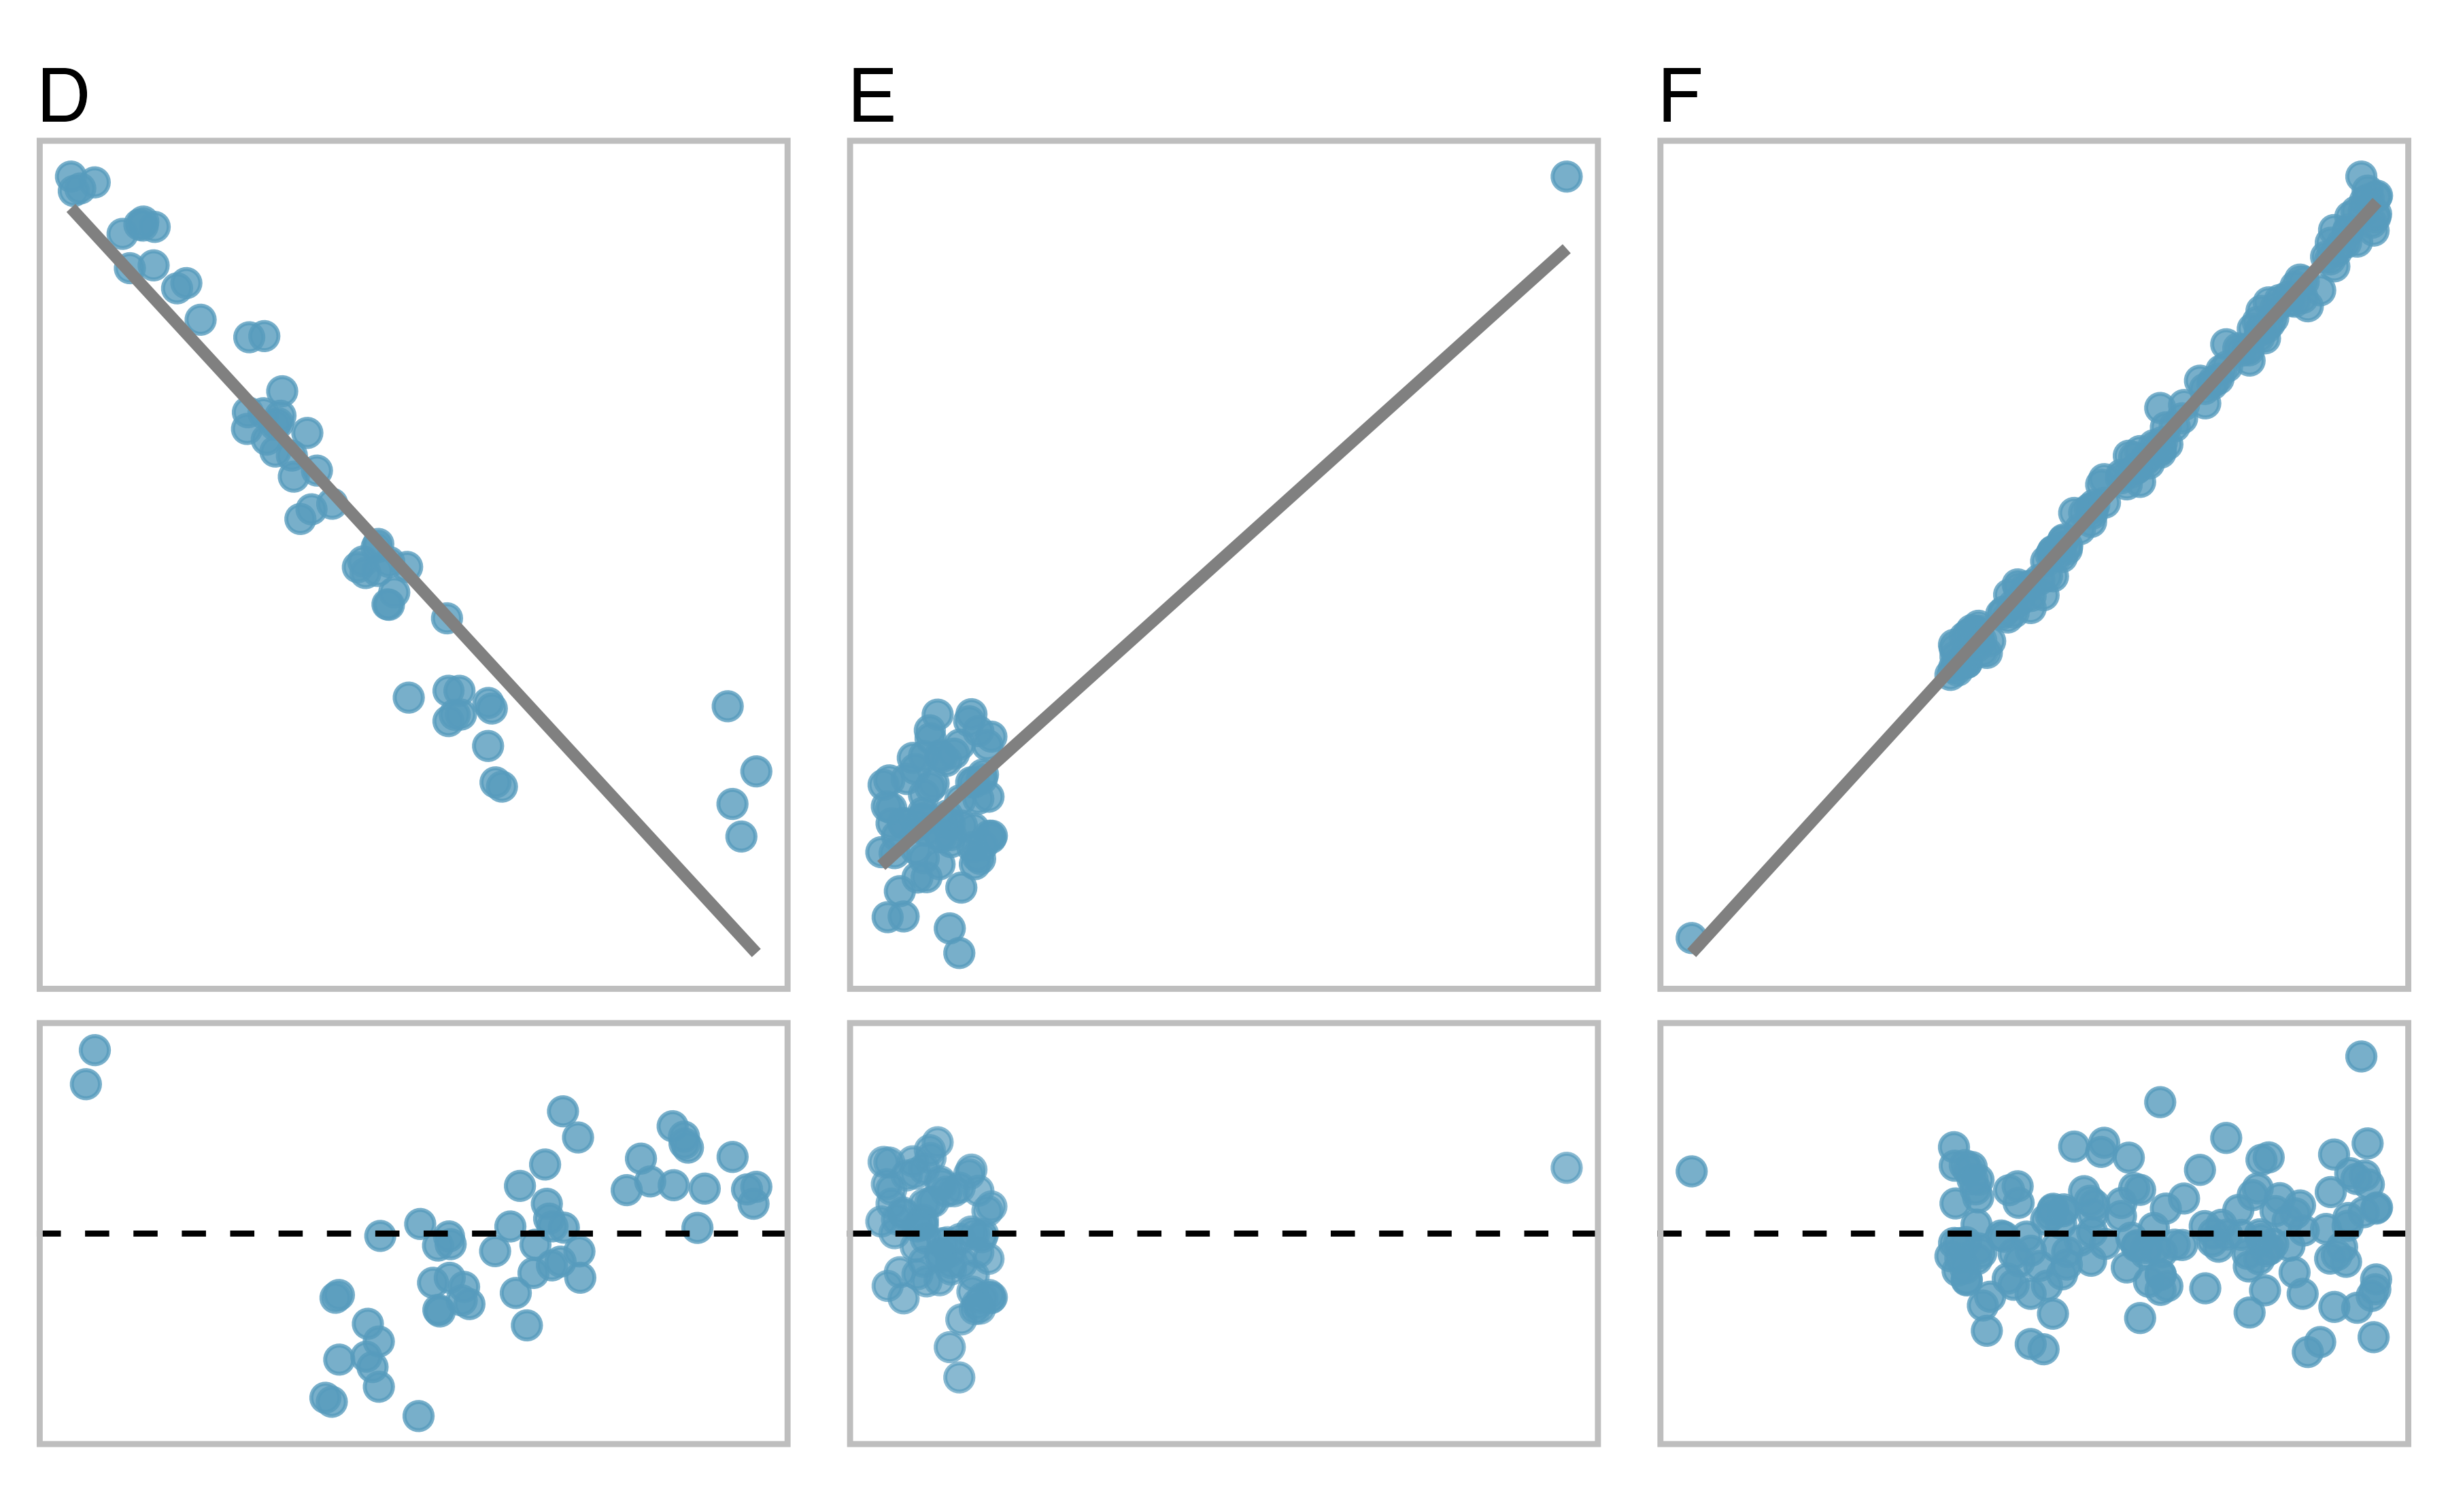 Three plots, each with a least squares line and residual plot. All datasets have at least one outlier.